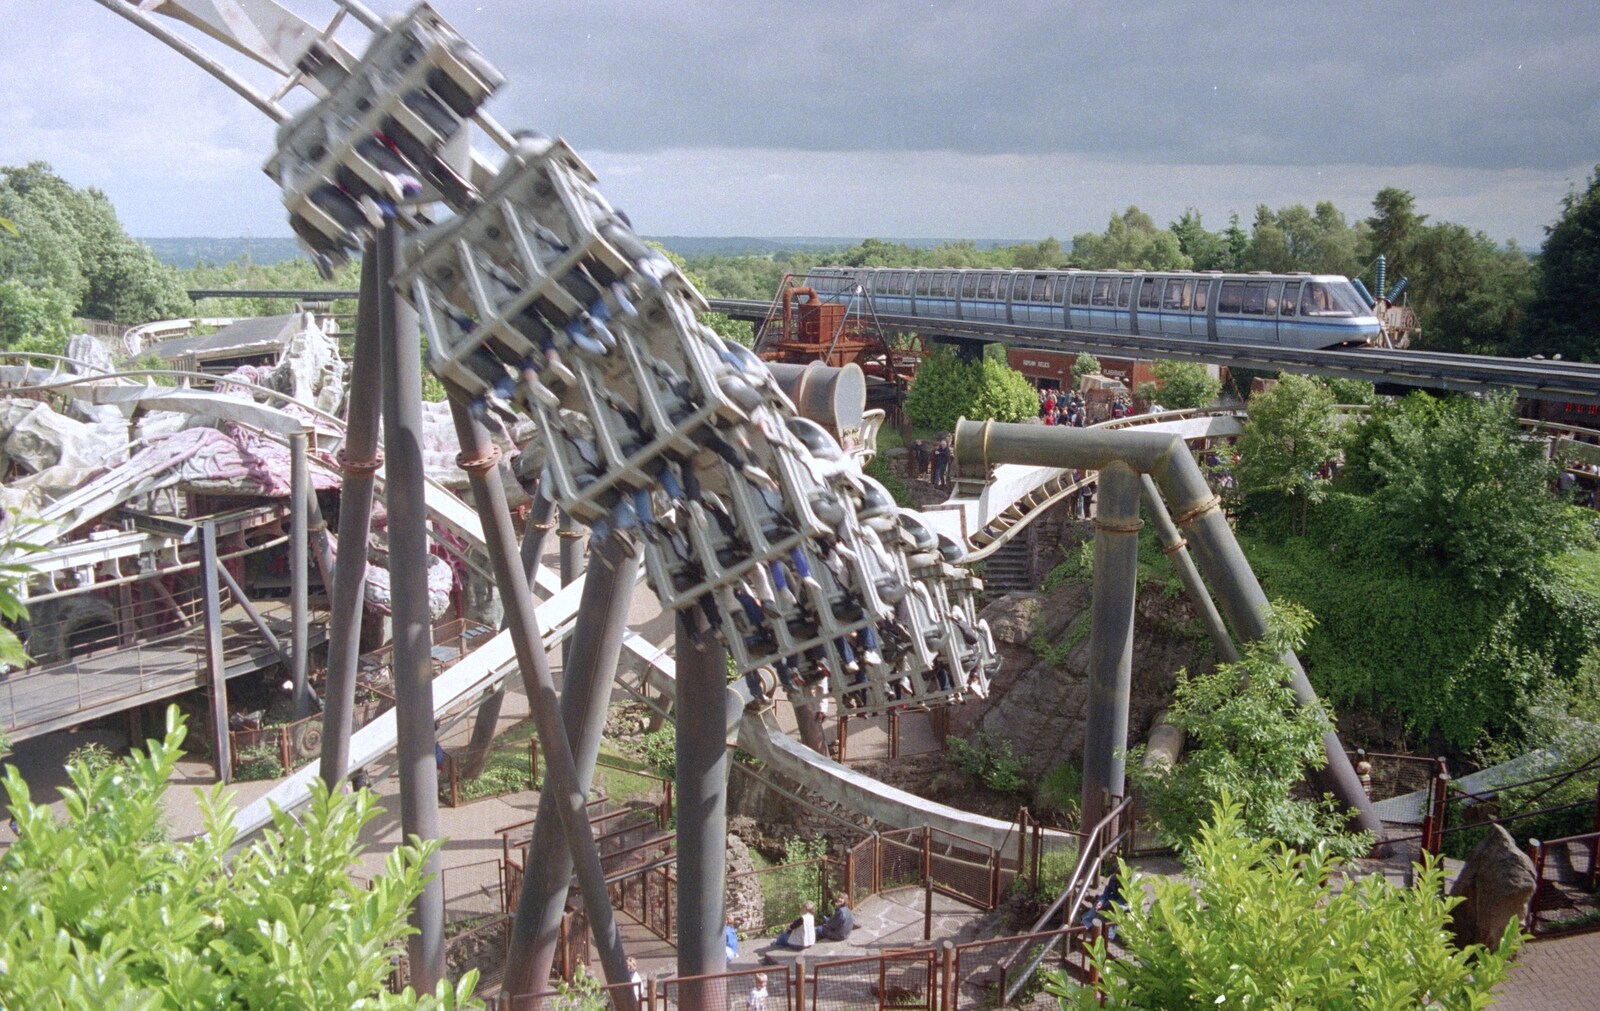 A Trip to Alton Towers, Staffordshire - 15th June 2000: A rollercoaster ride steams round as the monorail passes by sedately